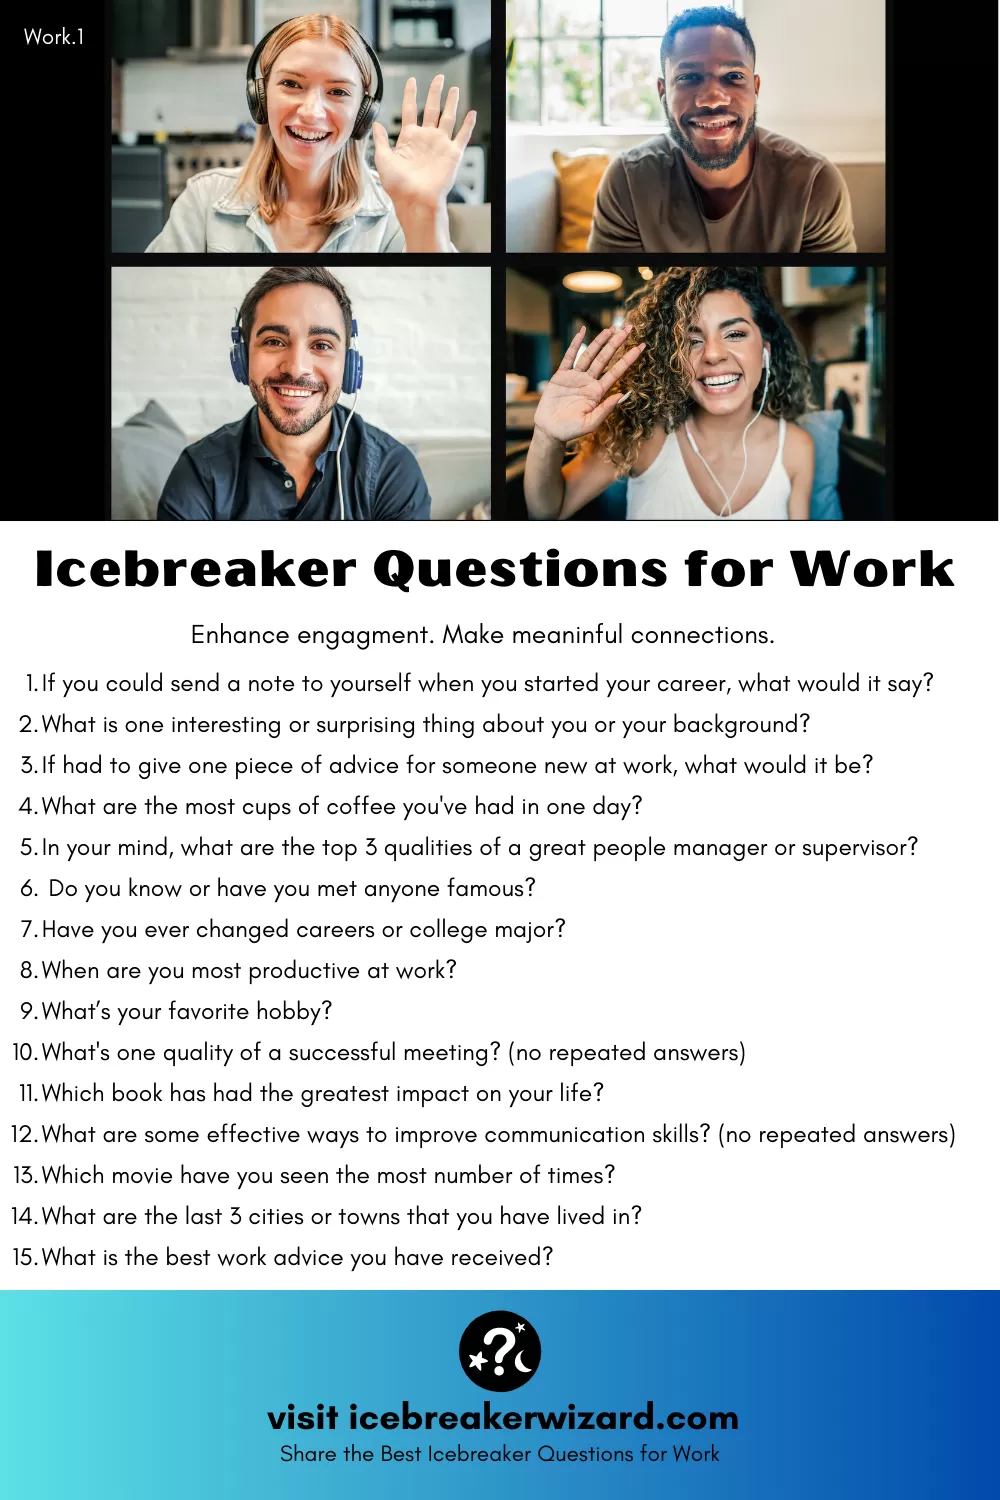 Icebreaker Questions for Work